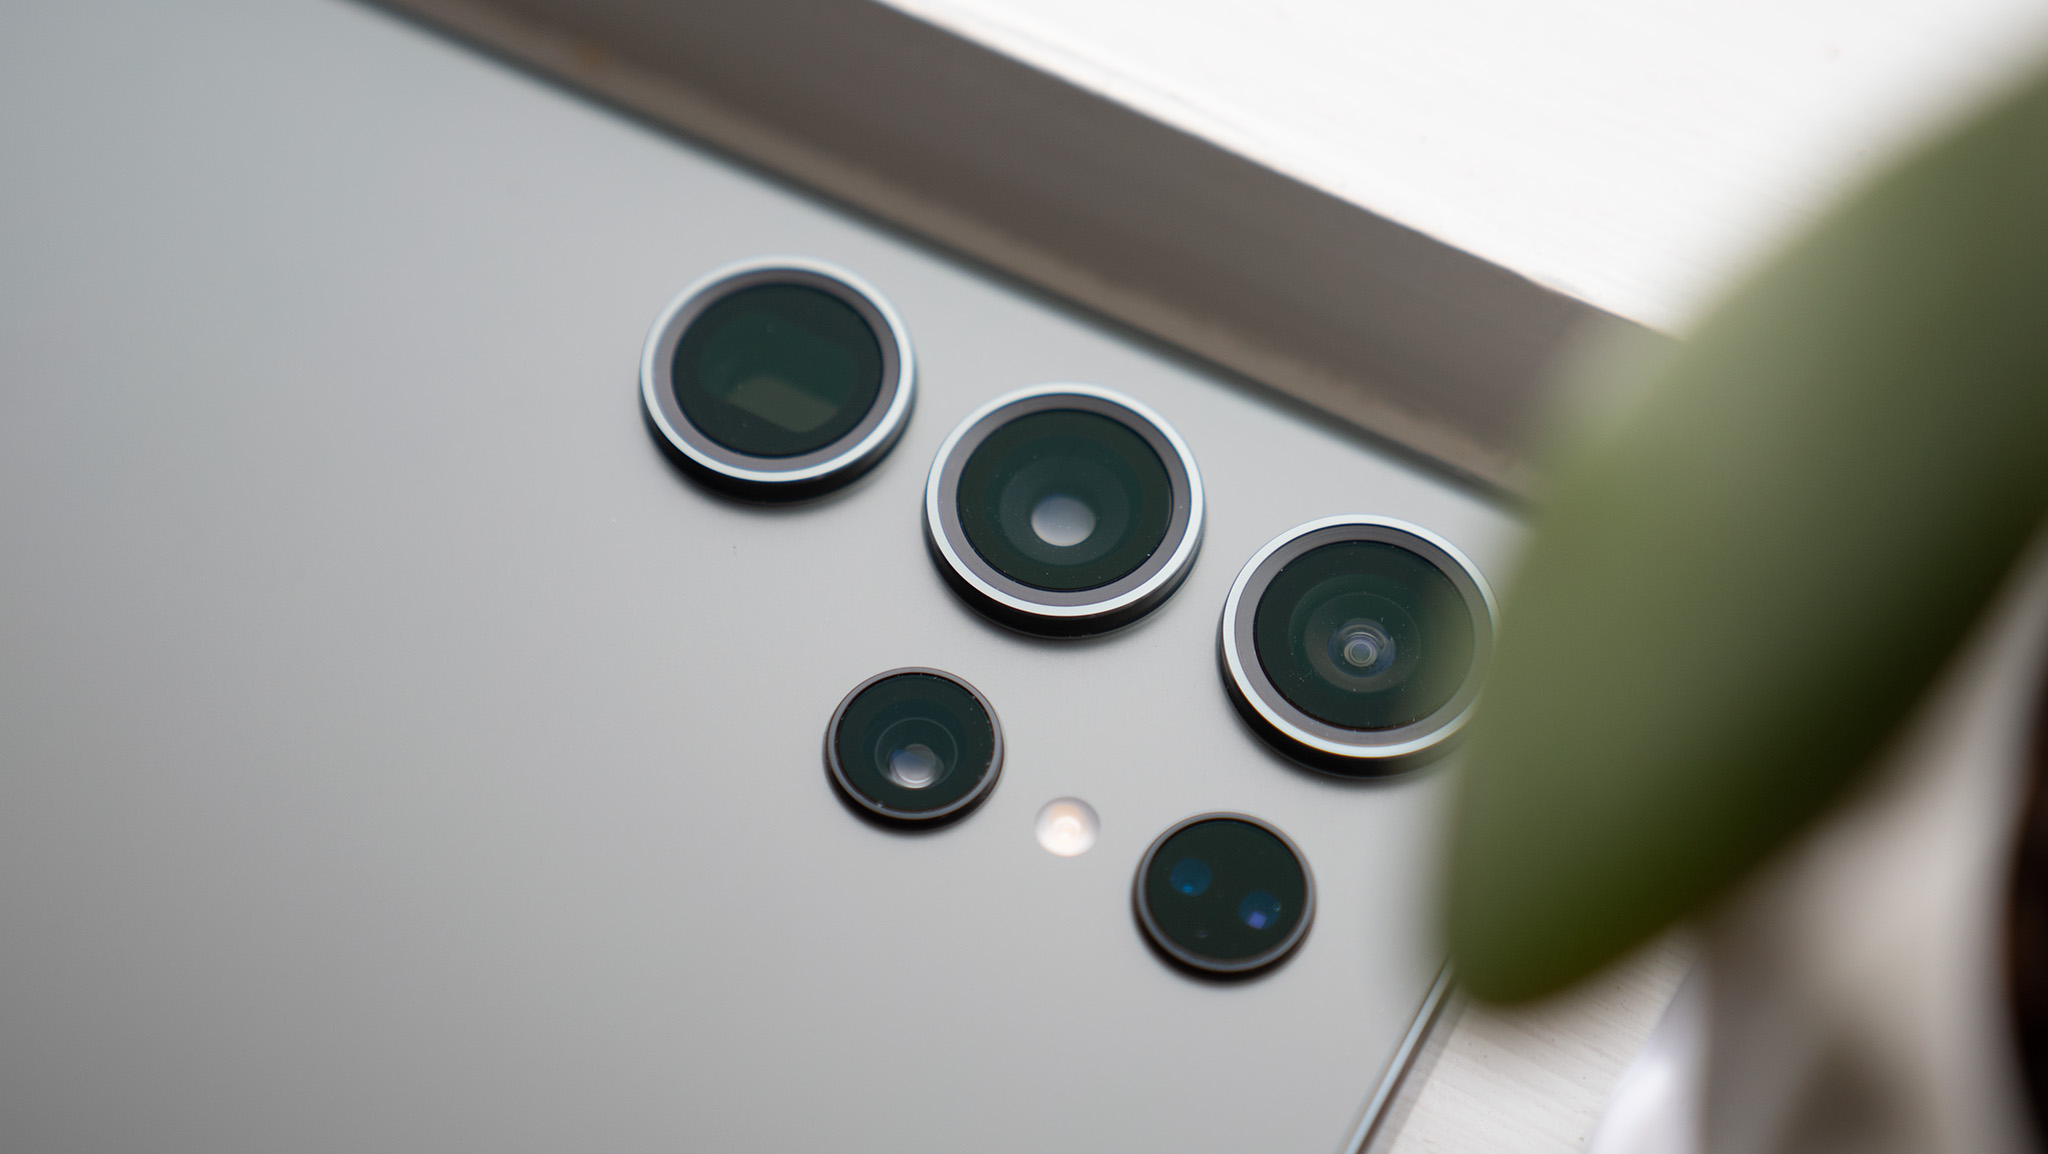 Notable camera modules on the Samsung Galaxy S23 Ultra